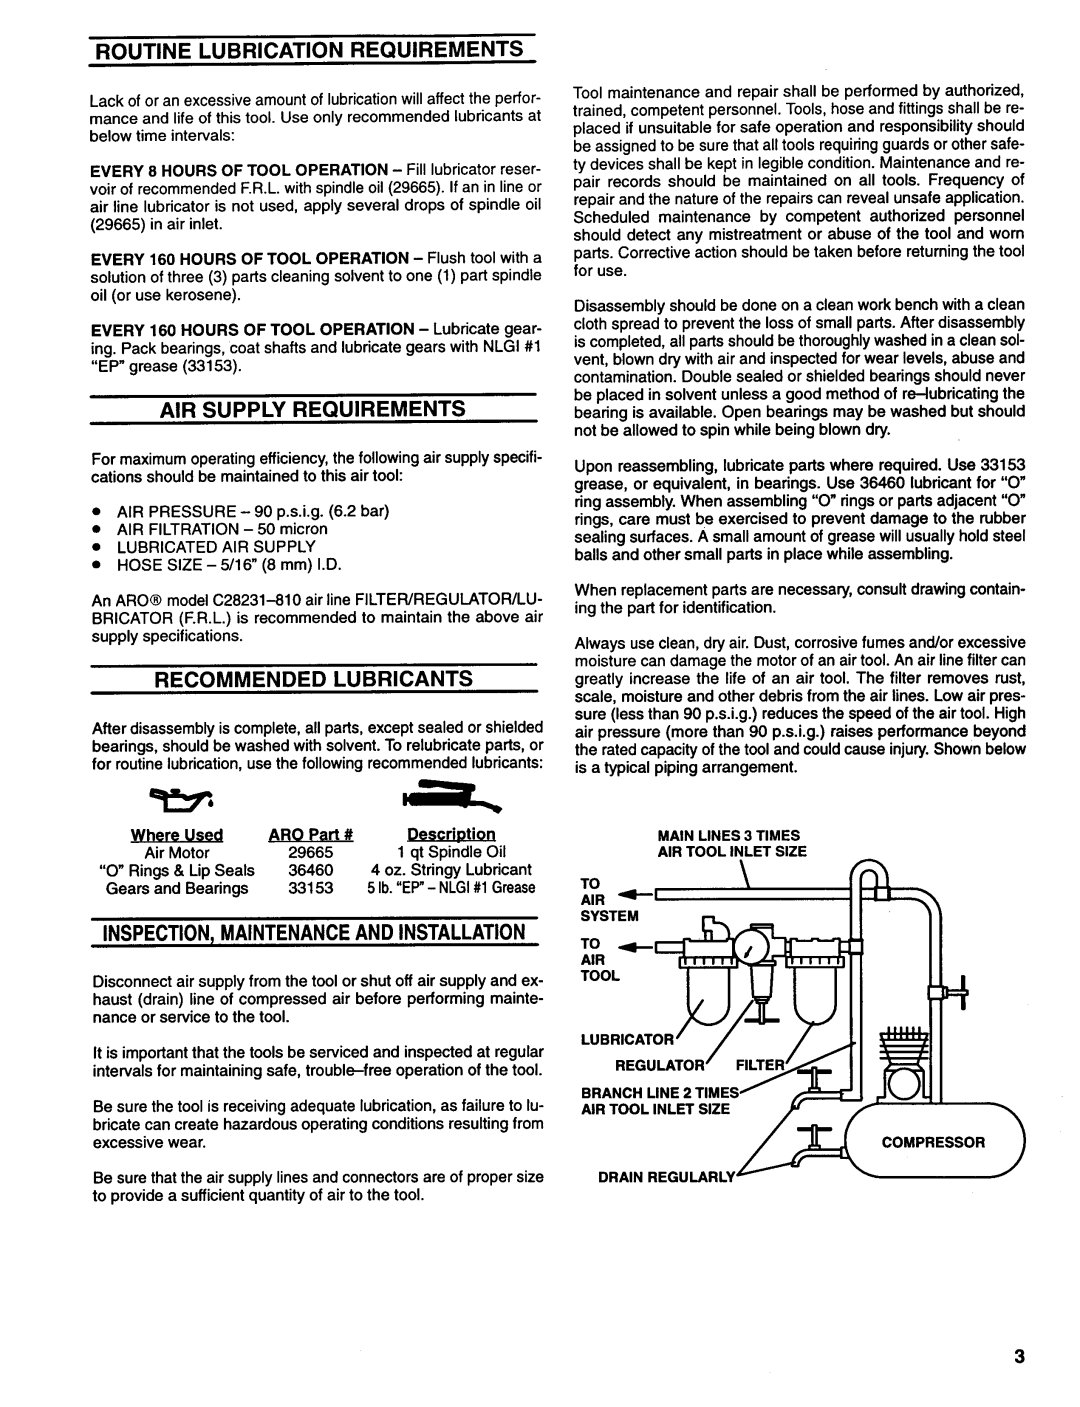 Ingersoll-Rand 49999-521 manual Routine Lubrication Requirements, Air Supply Requirements, Recommended Lubricants 